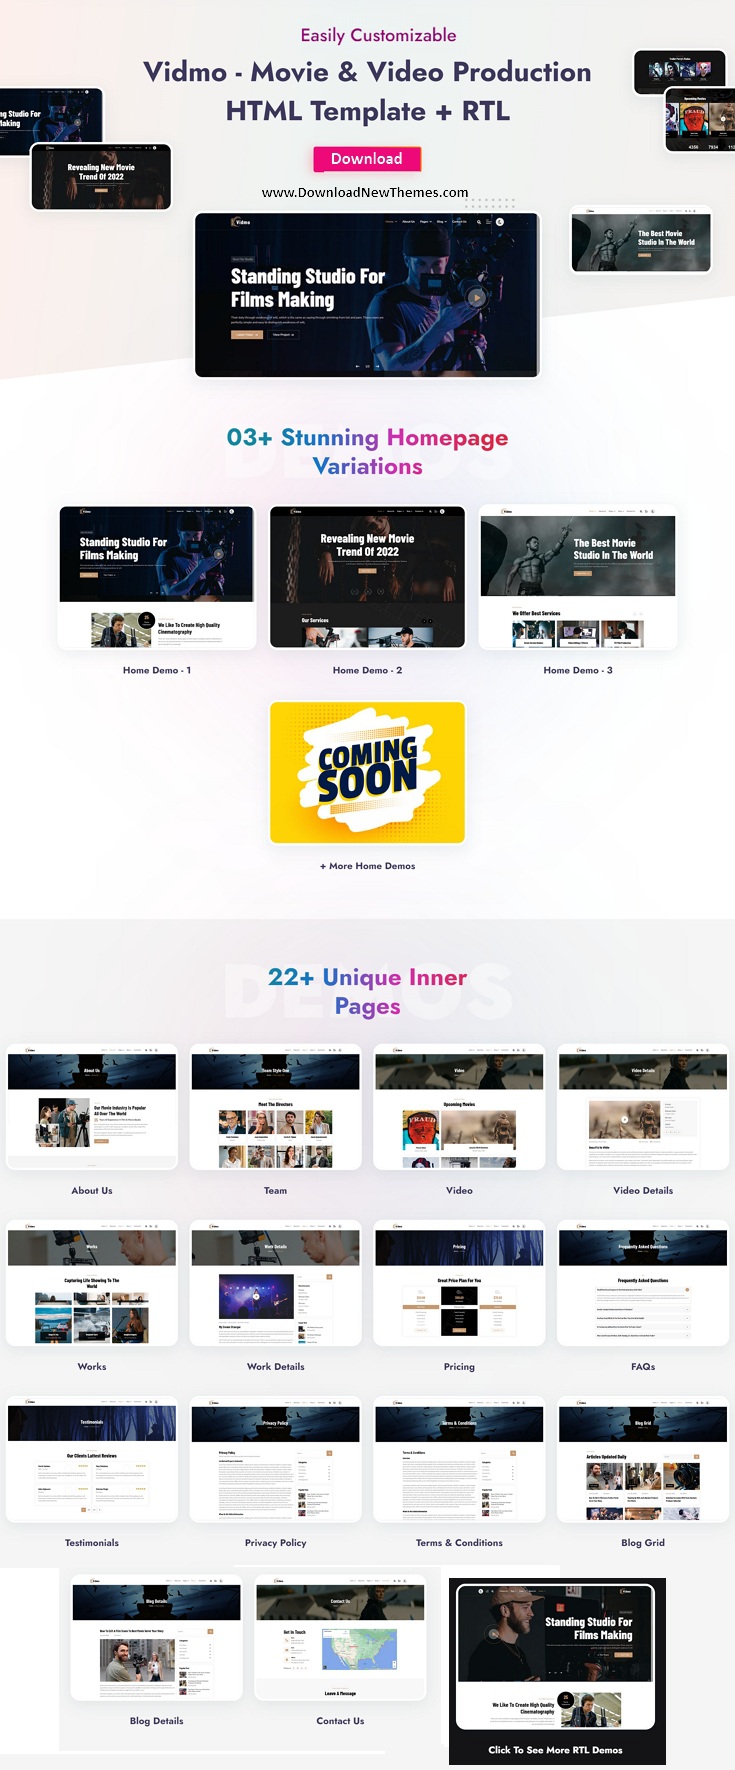 Vidmo - Movie & Video Production HTML Template Review